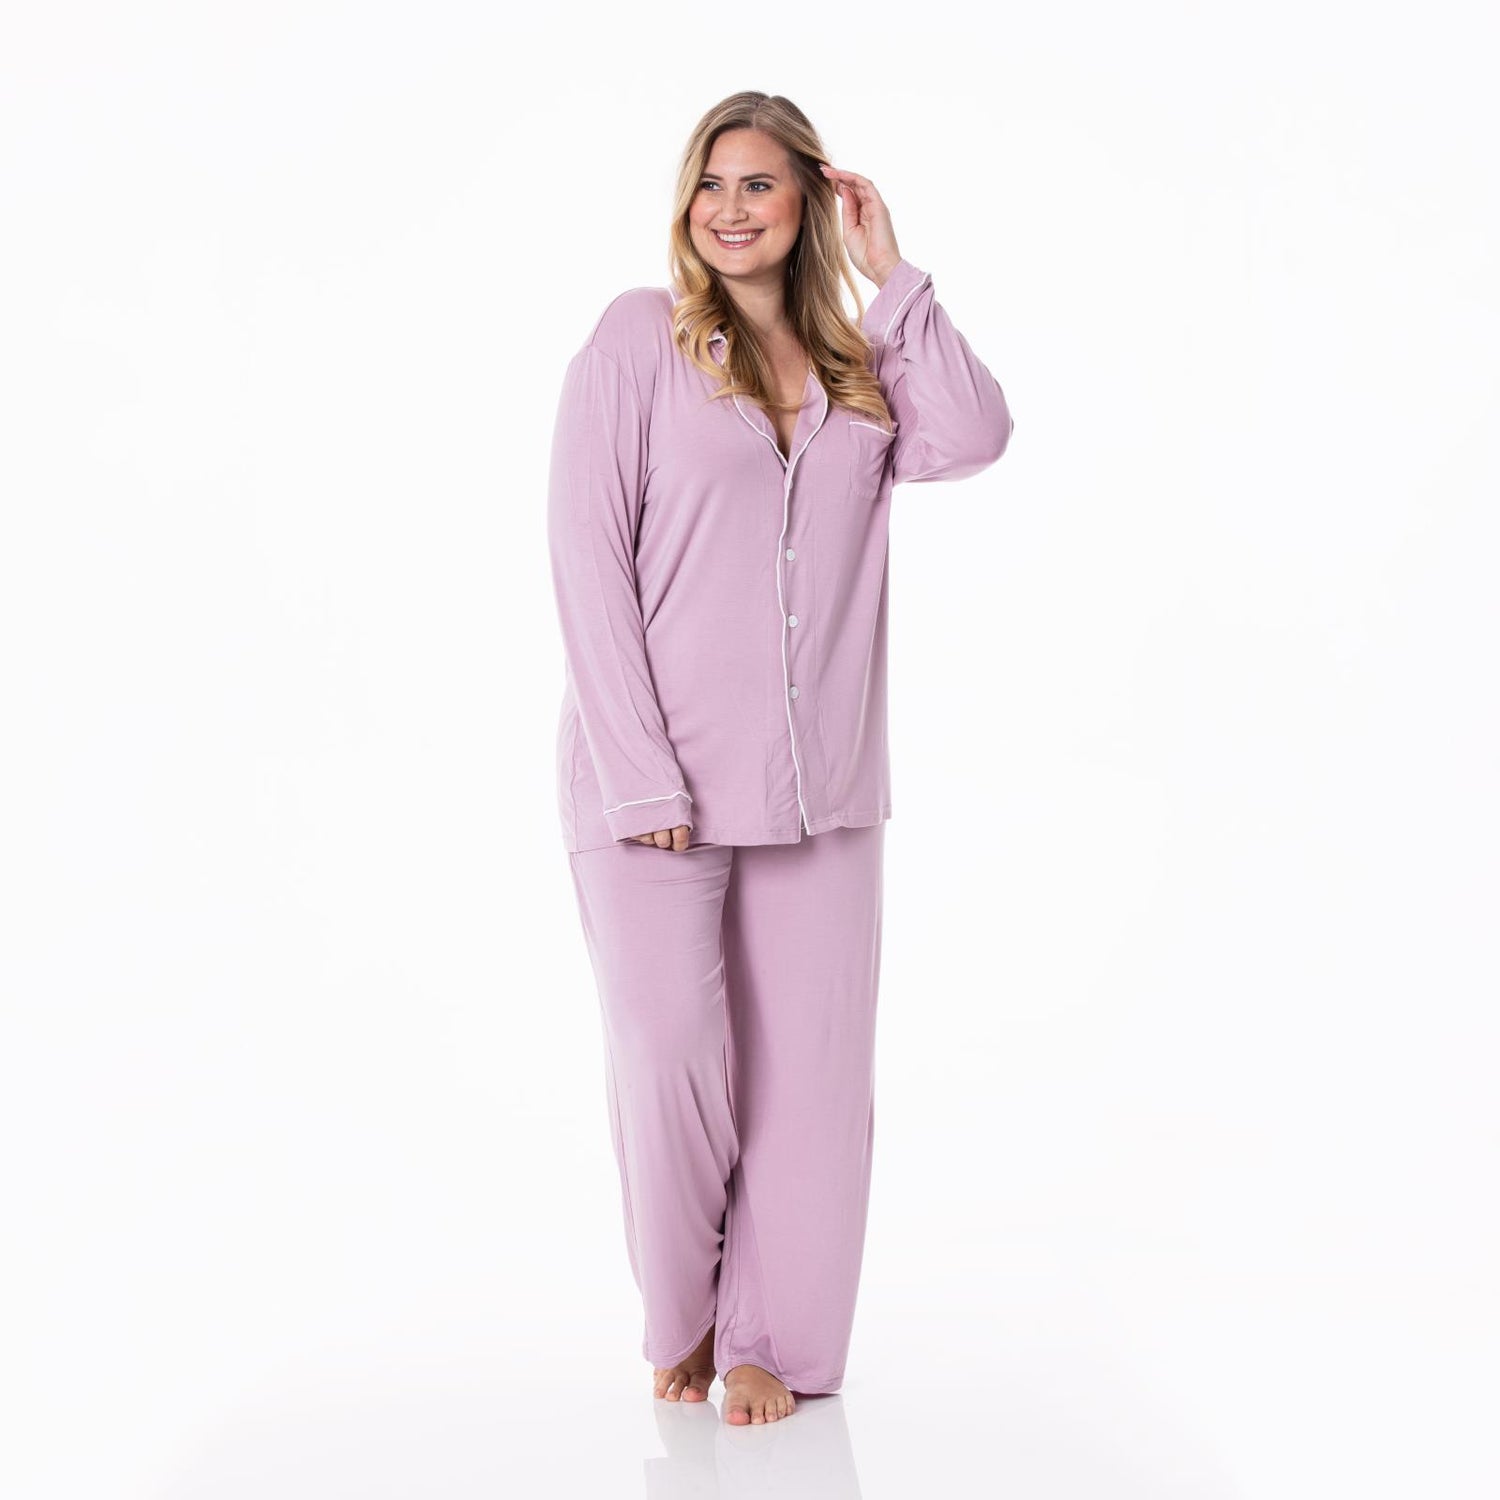 Women's Long Sleeved Collared Pajama Set in Sweet Pea with Natural